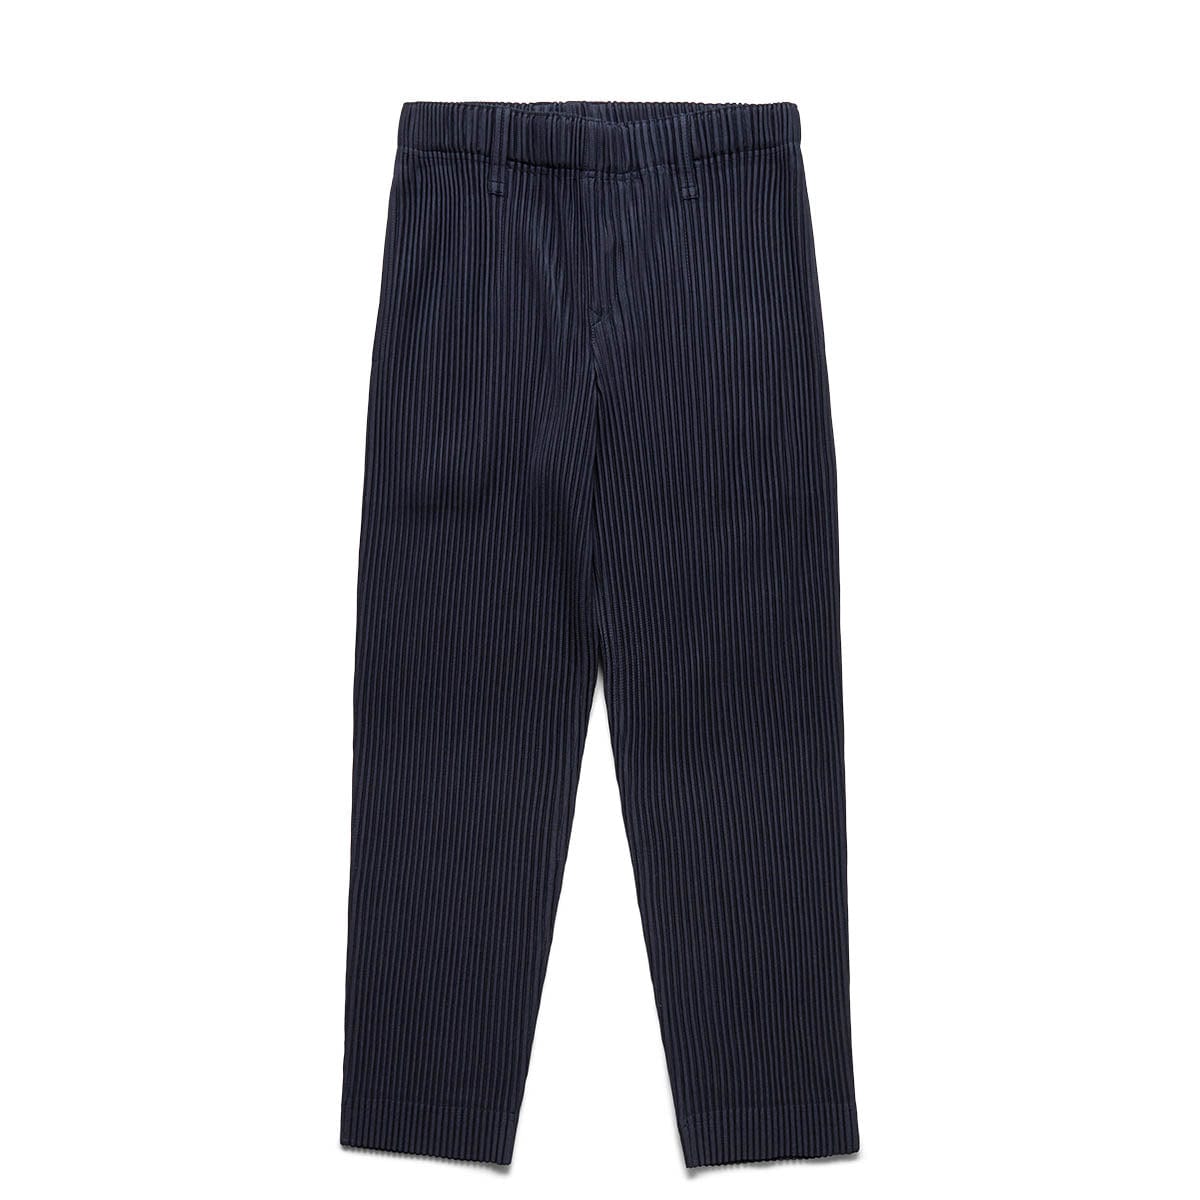 Homme Plissé Issey Miyake Bottoms SLIM TROUSERS